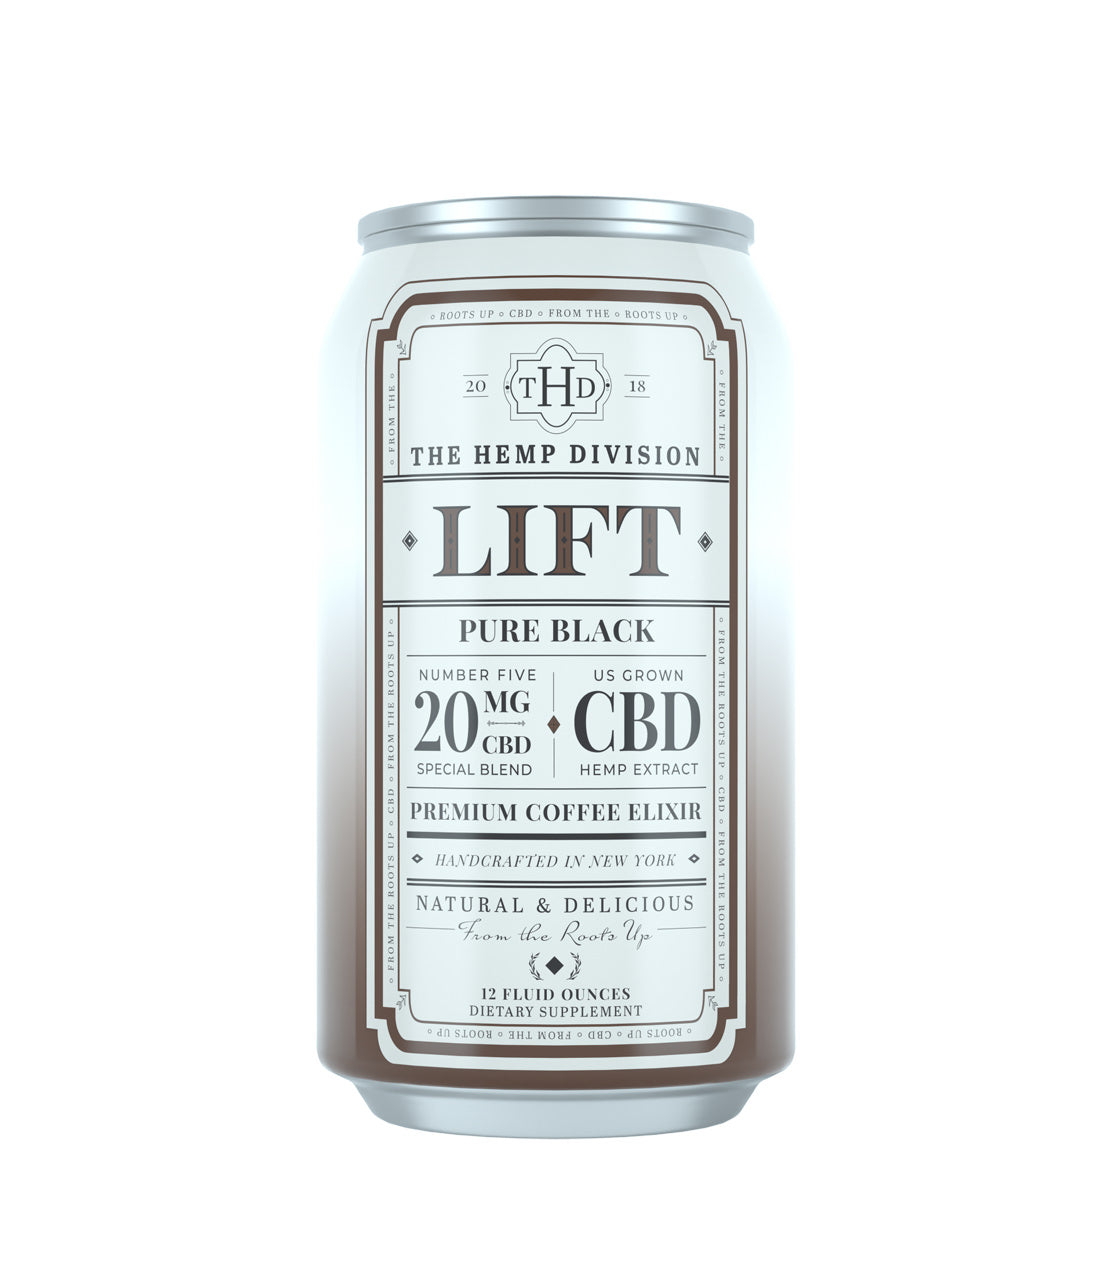 Lift - 20 MG CBD - 12 oz. Can Case of 8 Cans - Harney & Sons Fine Teas